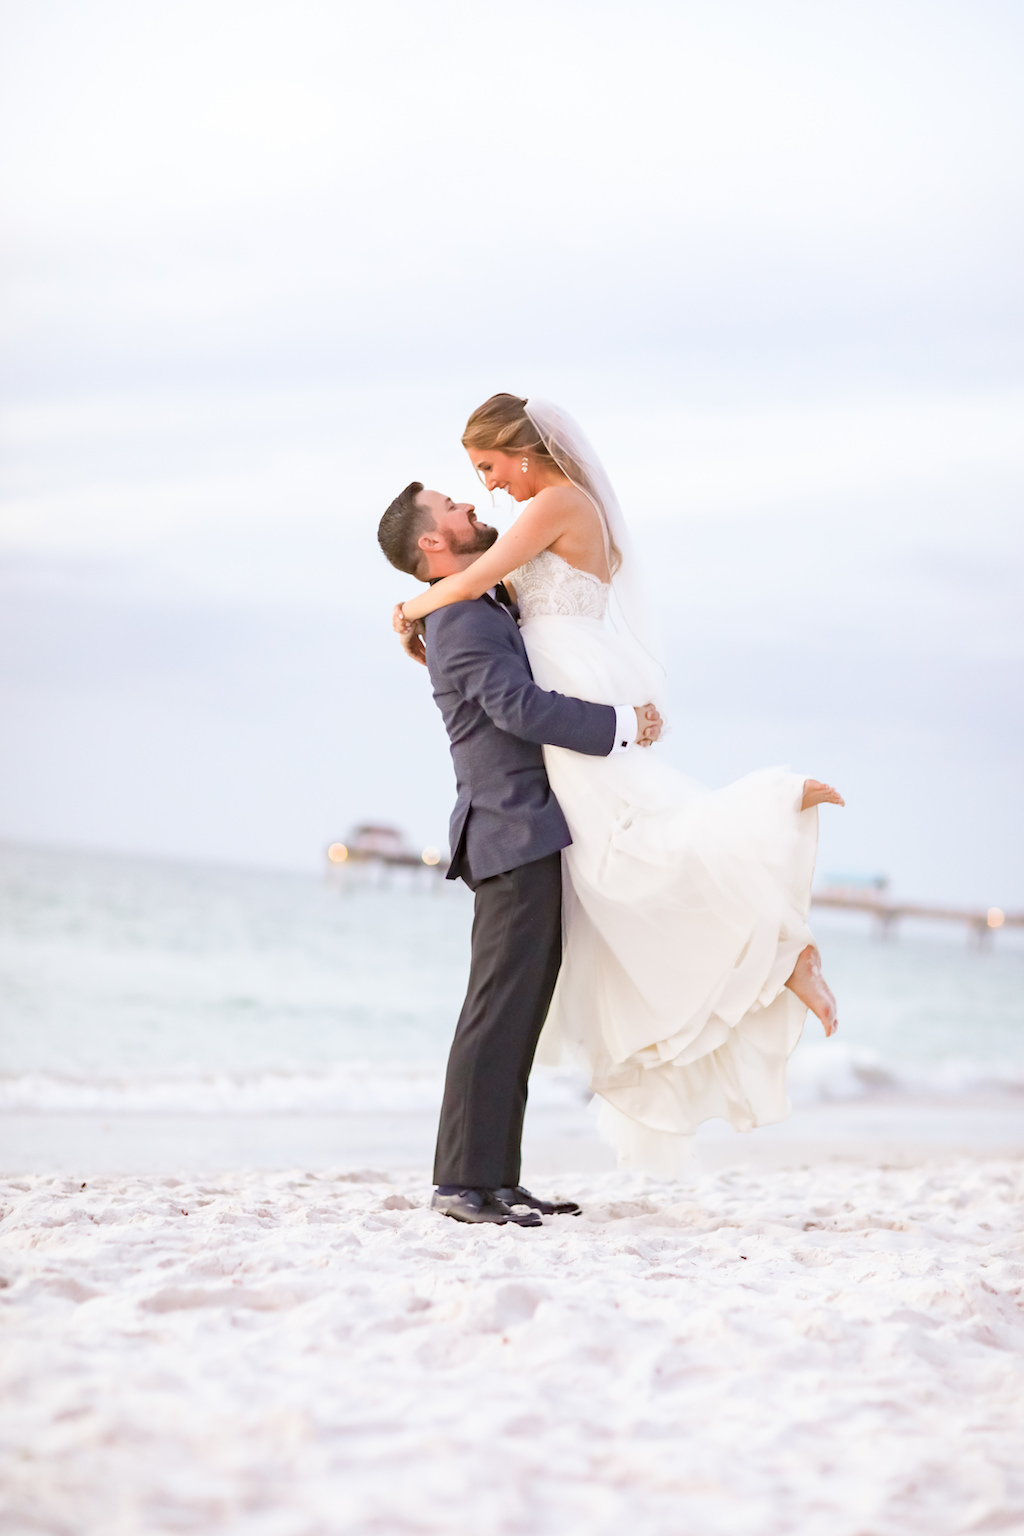 Outdoor Beach Wedding Portrait, Bride in Strapless Wtoo Bridal Dress, Groom in Gray and Black Suit | Tampa Bay Wedding Photographer Lifelong Studios Photography